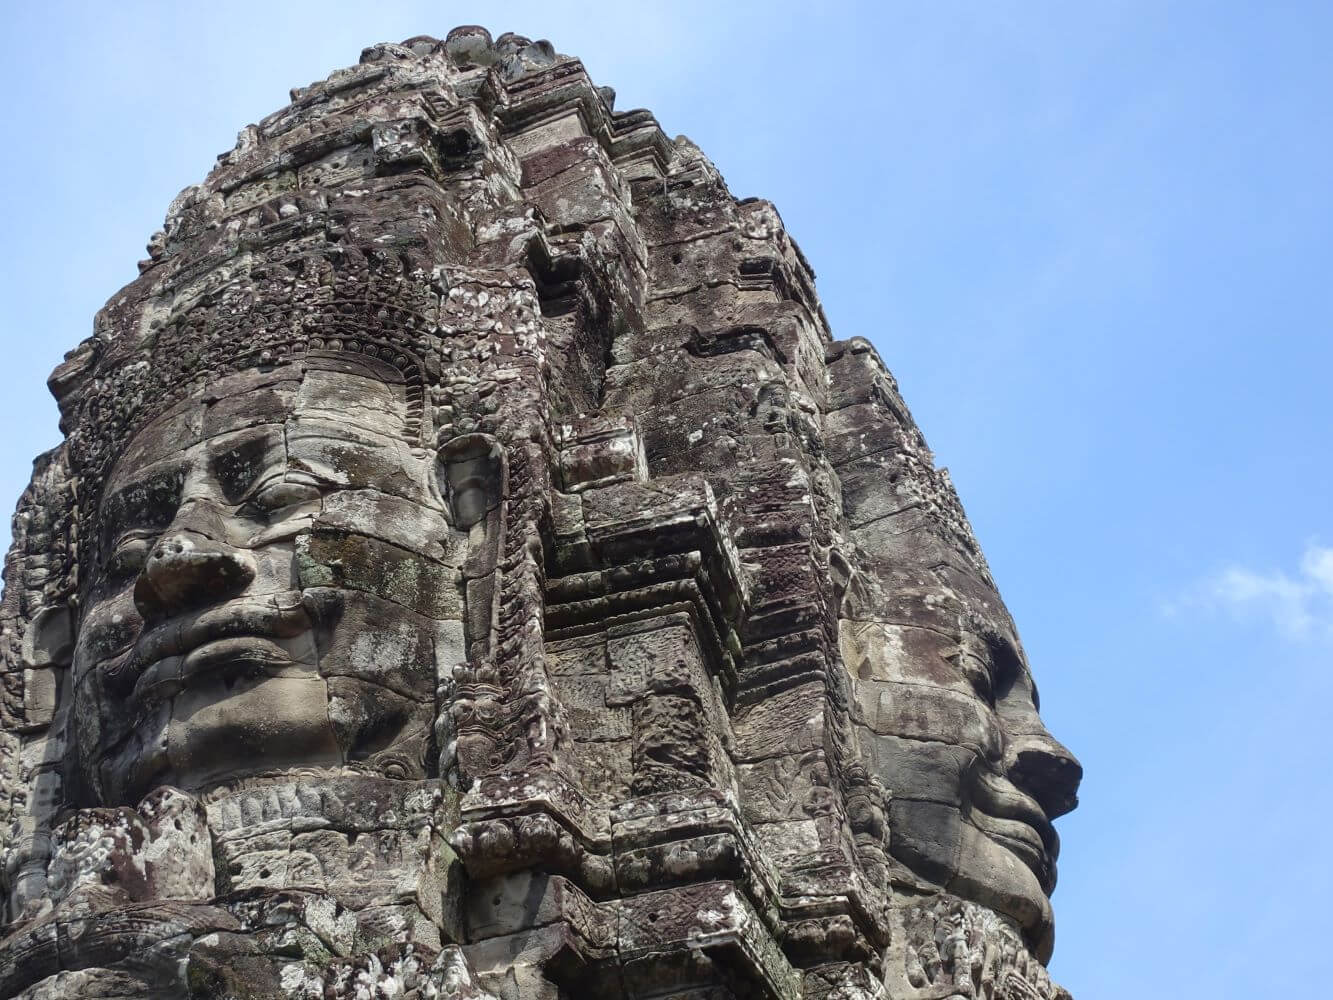 The Bayon Temple - My favorite temple in Siem Reap, Cambodia